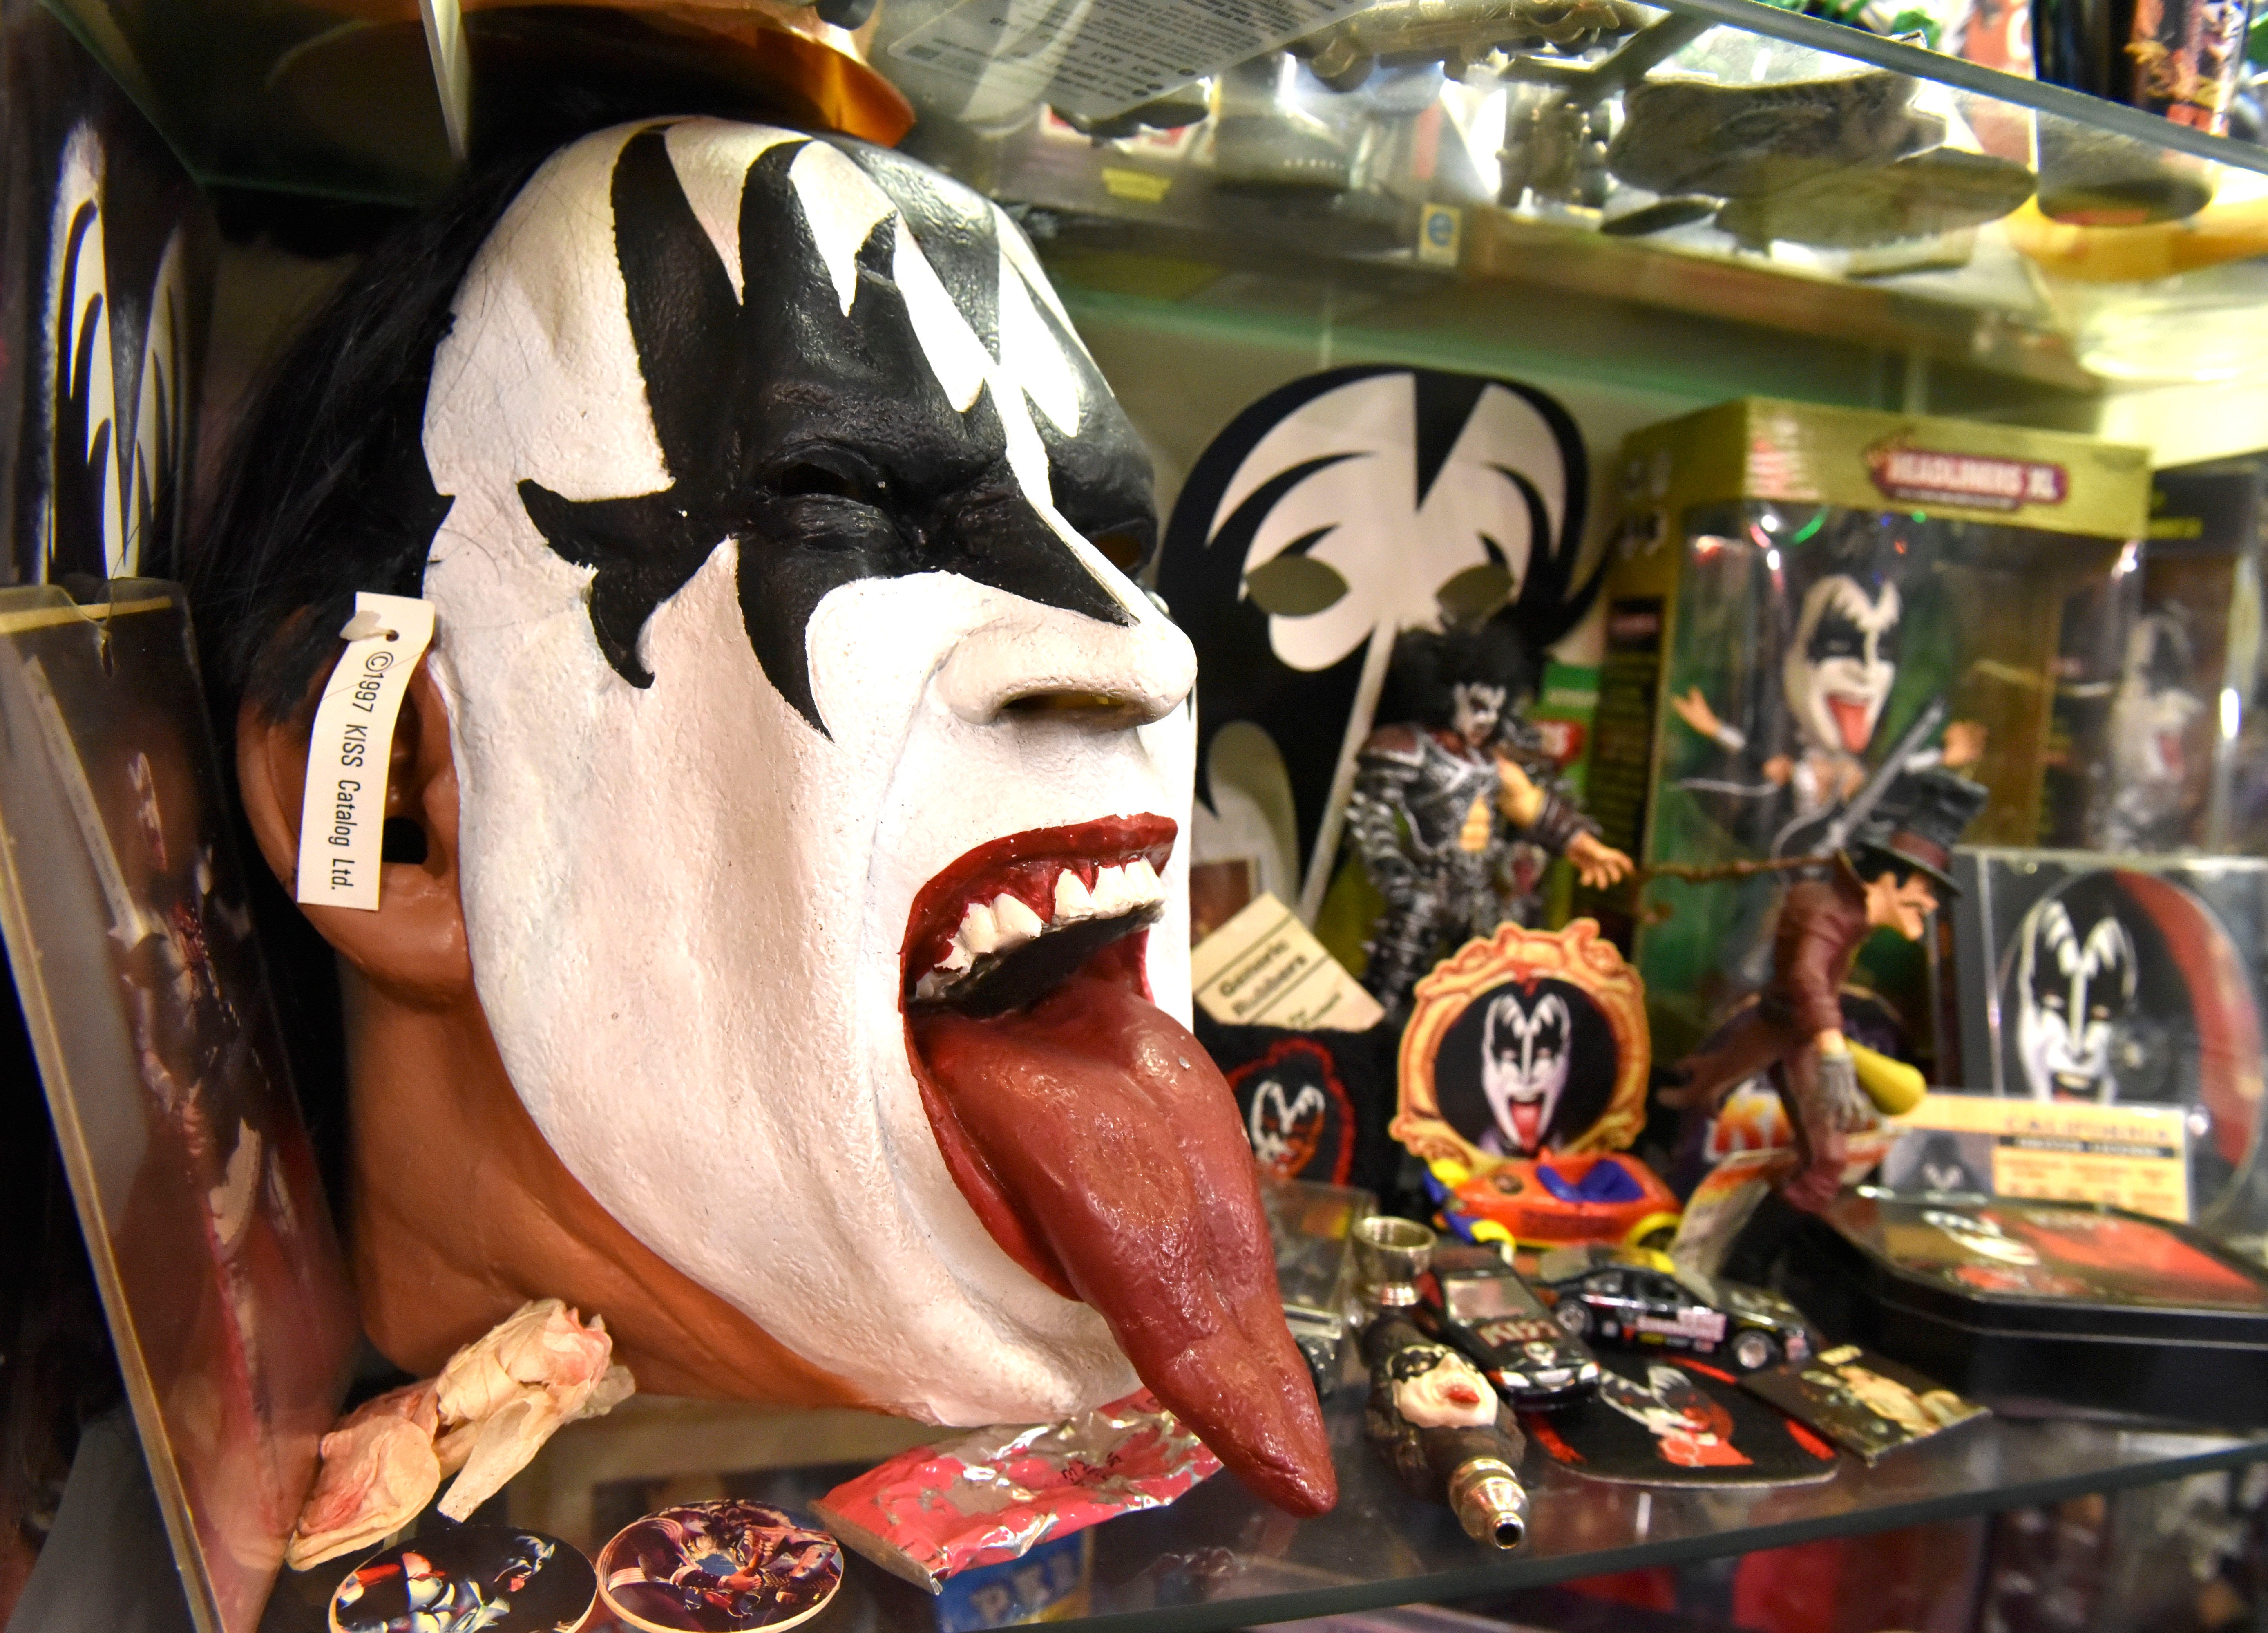 This is a Gene Simmons mask.